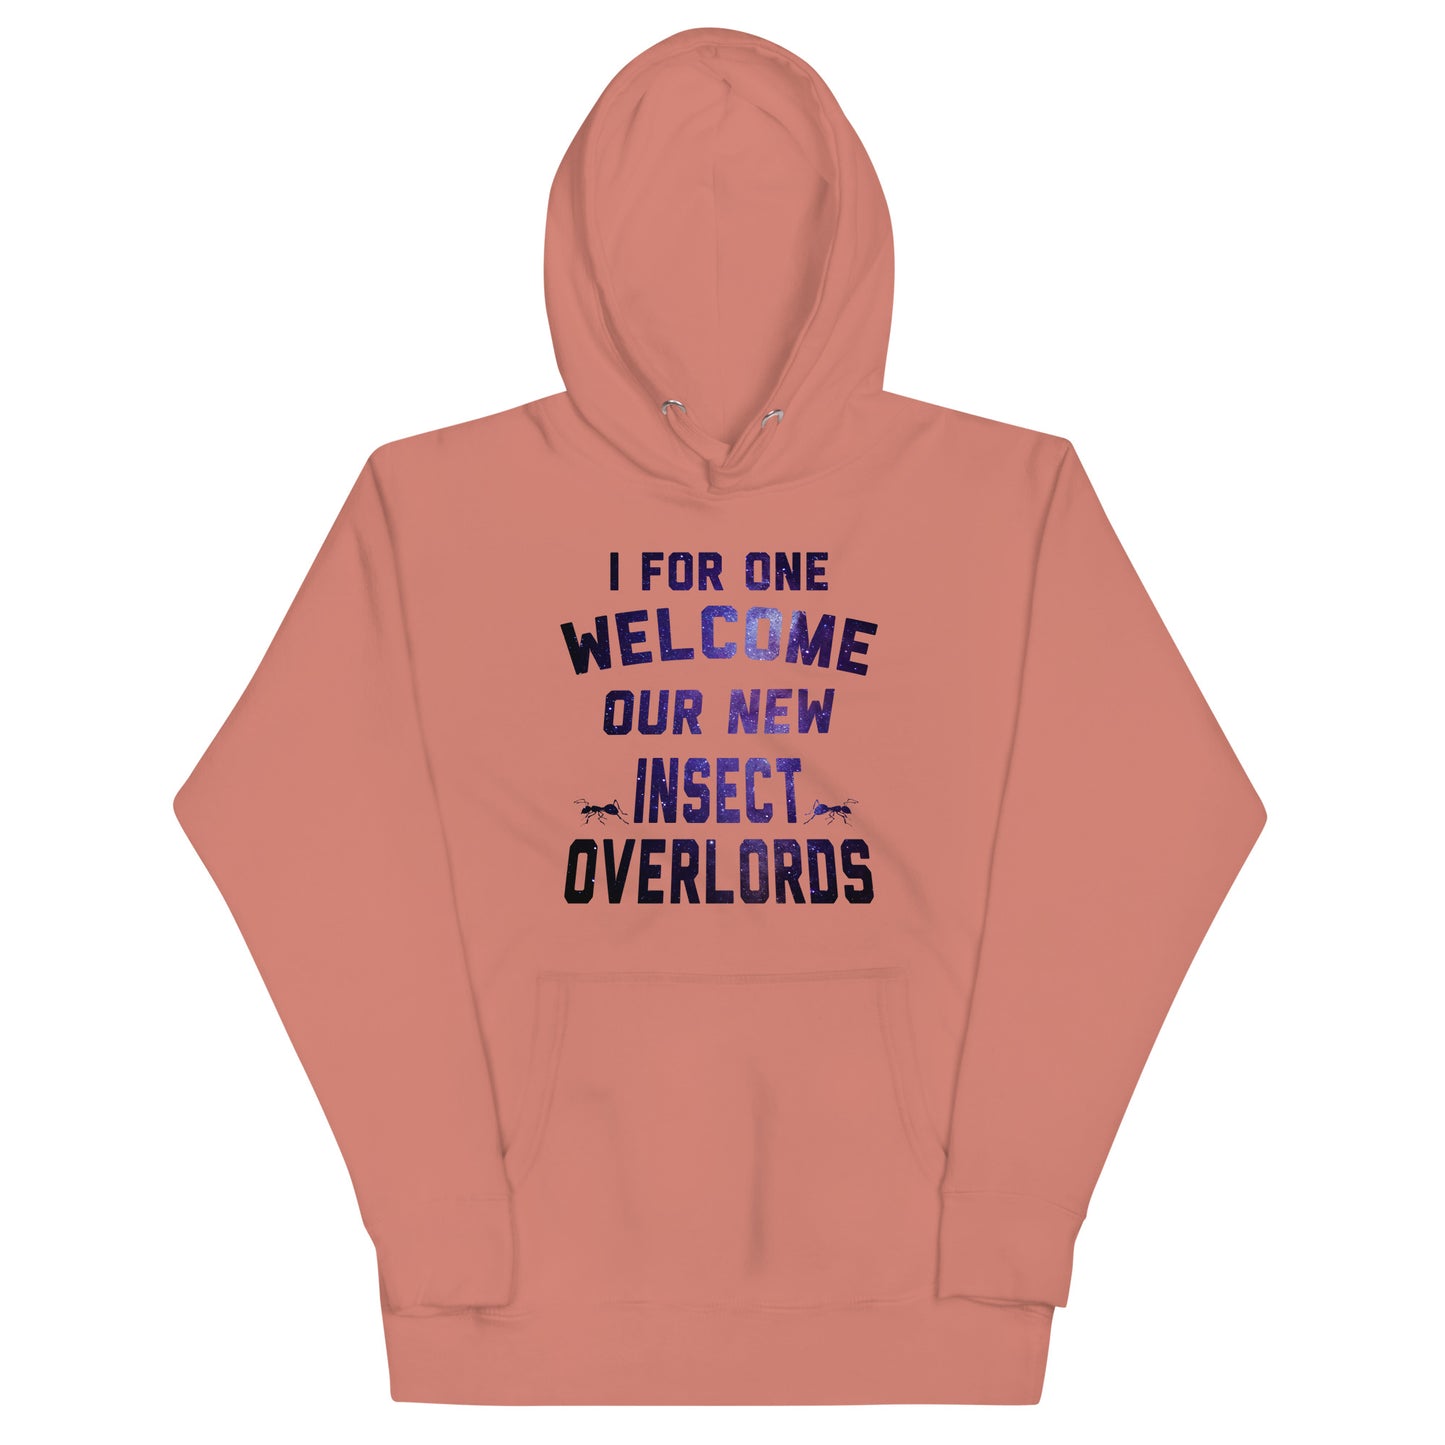 I For One Welcome Our New Insect Overlords Unisex Hoodie